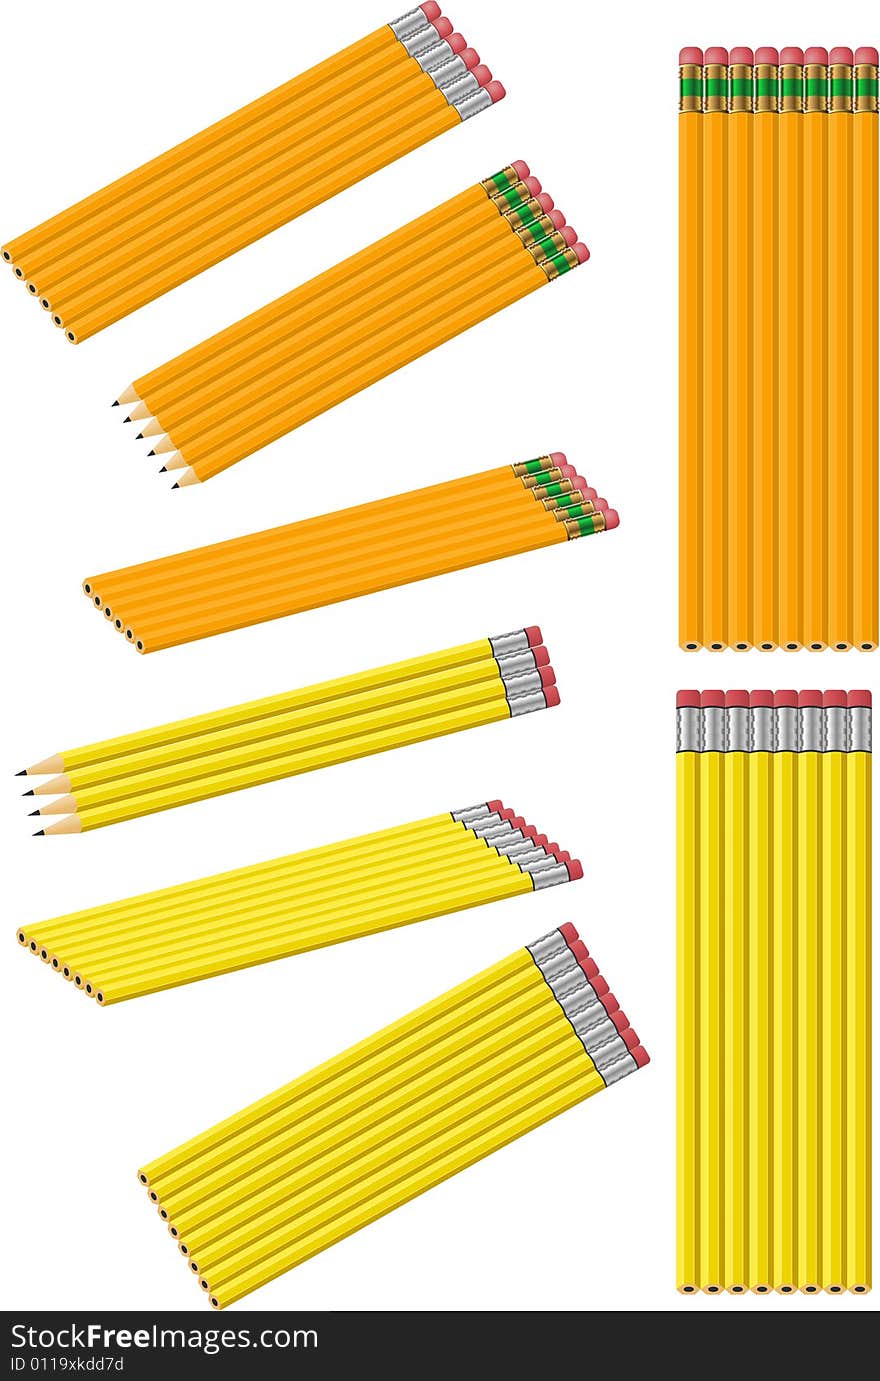 A series of pencils isolated on white, some sharpened and some unsharpened. A series of pencils isolated on white, some sharpened and some unsharpened.